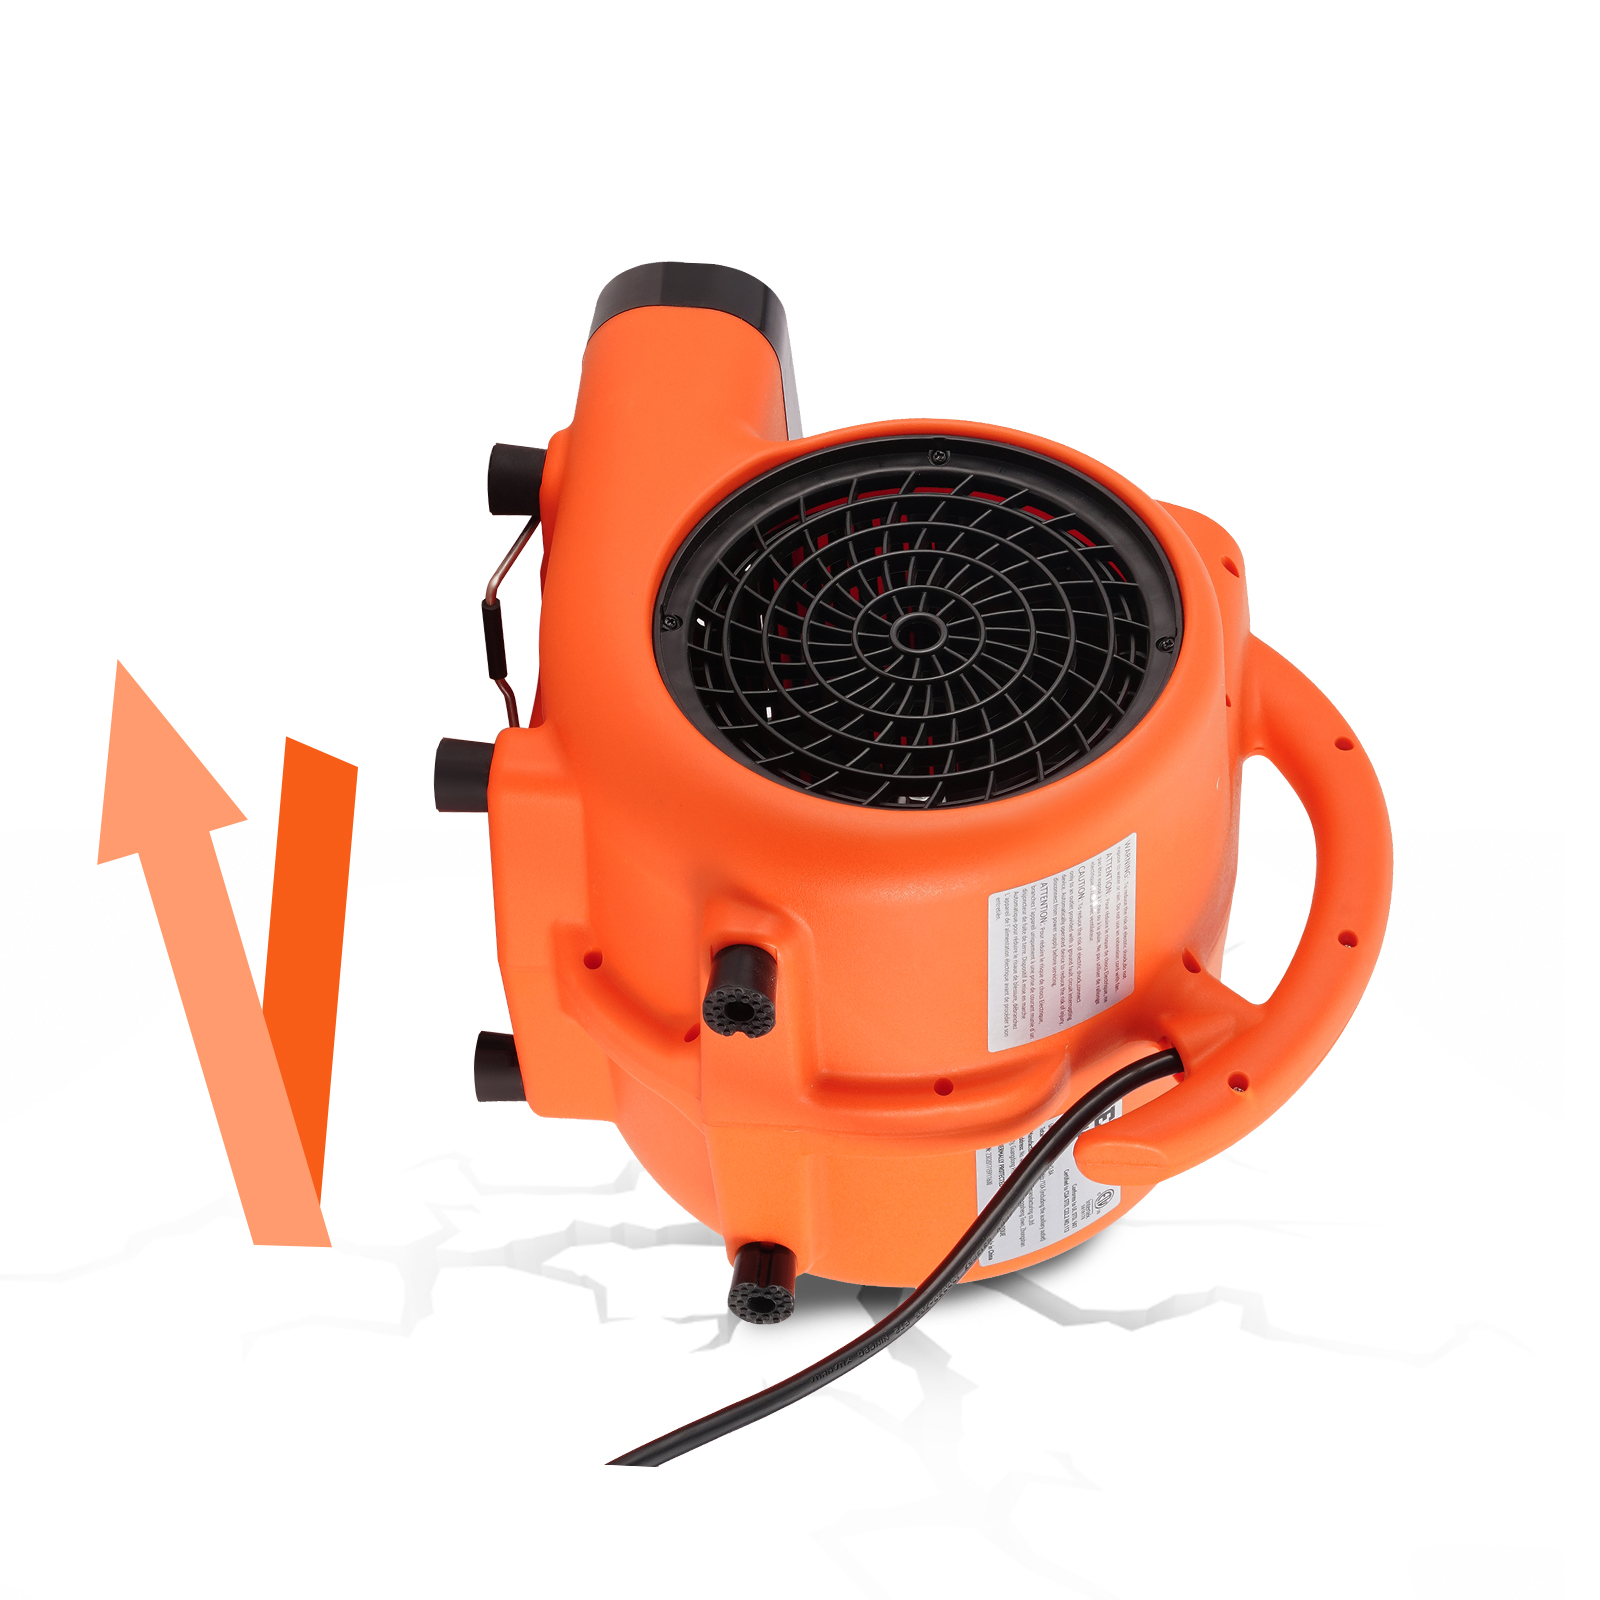 VEVOR Floor Blower, 1/4 HP, 1000 CFM Air Mover for Drying and Cooling,  Portable Carpet Dryer Fan with 4 Blowing Angles and Time Function, for  Janitorial, Home, Commercial, Industrail Use, ETL Listed